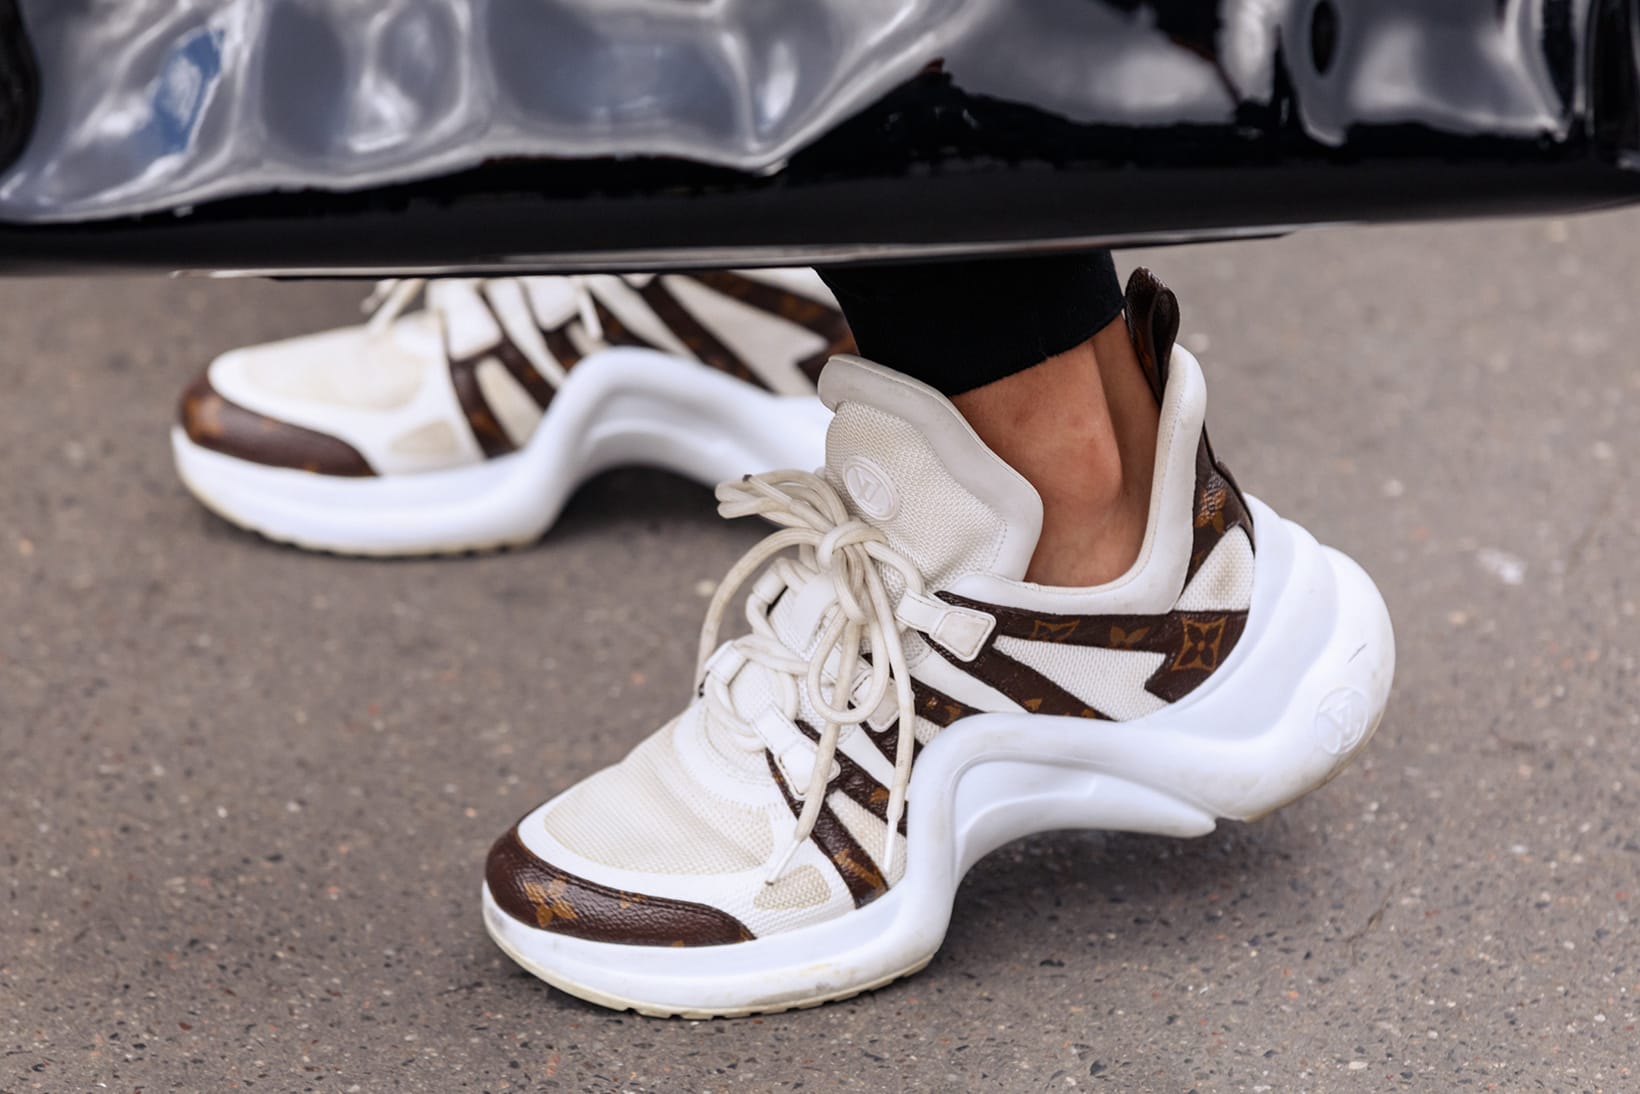 Louis Vuittons Archlight Sneakers Are This Seasons MustHave Designer  Kicks  GQ